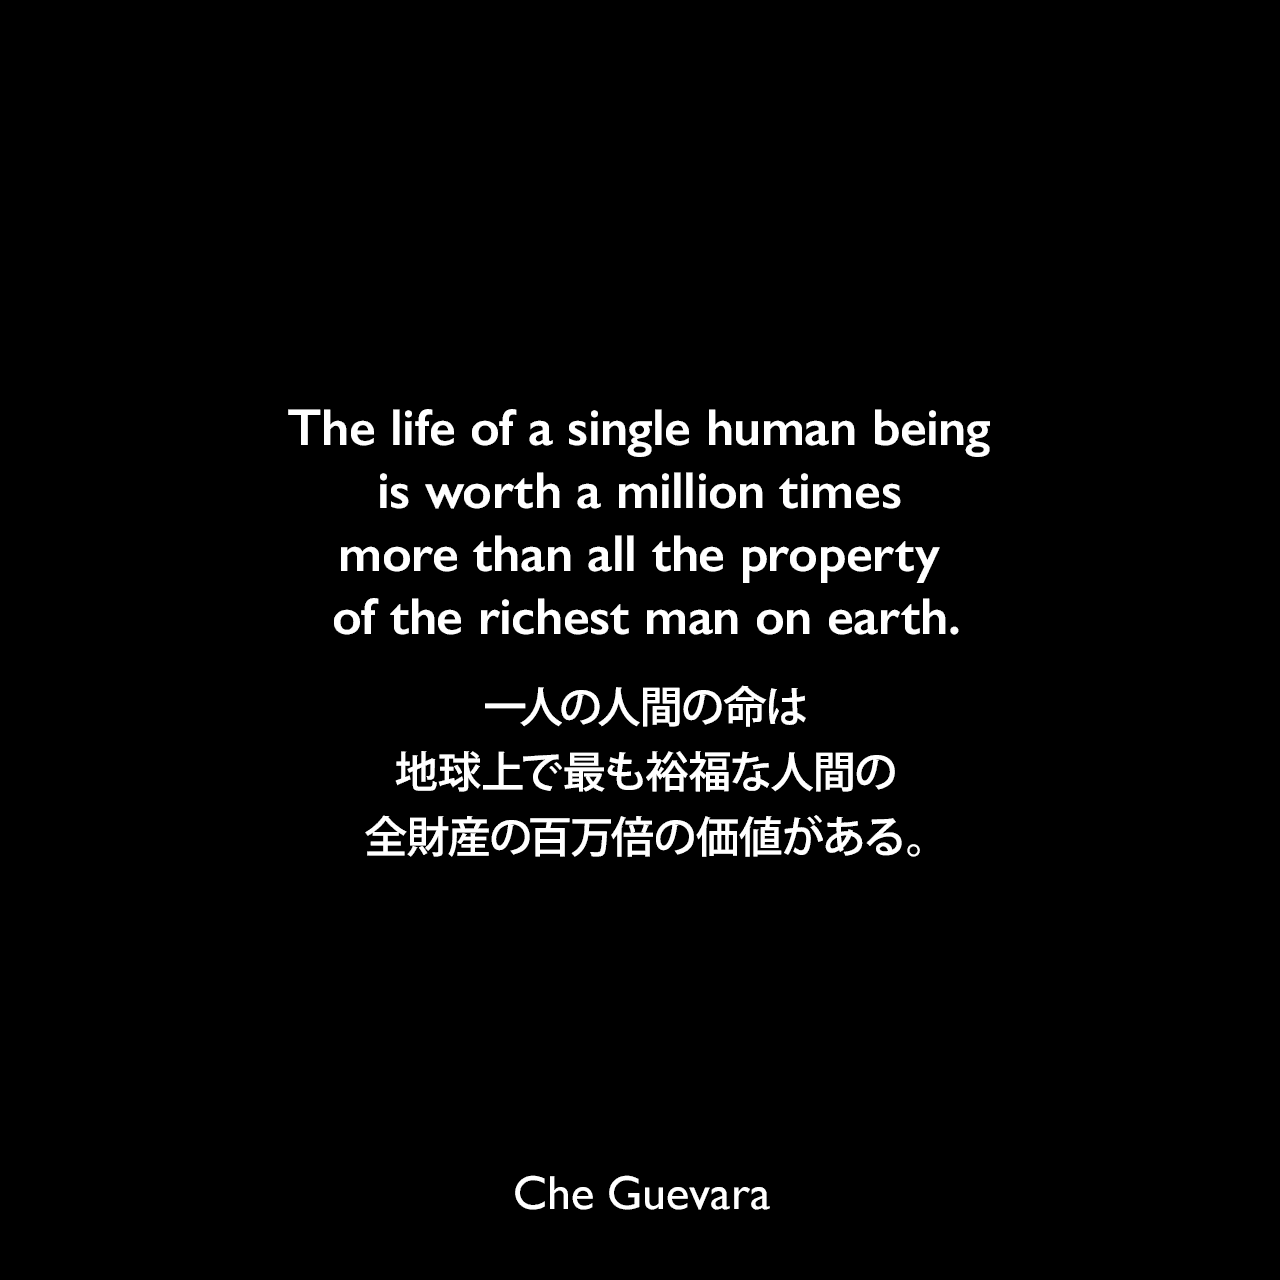 The life of a single human being is worth a million times more than all the property of the richest man on earth.一人の人間の命は、地球上で最も裕福な人間の全財産の百万倍の価値がある。- 1960年8月16日キューバの民兵に送られたゲバラのスピーチ「On Revolutionary Medicine」よりChe Guevara